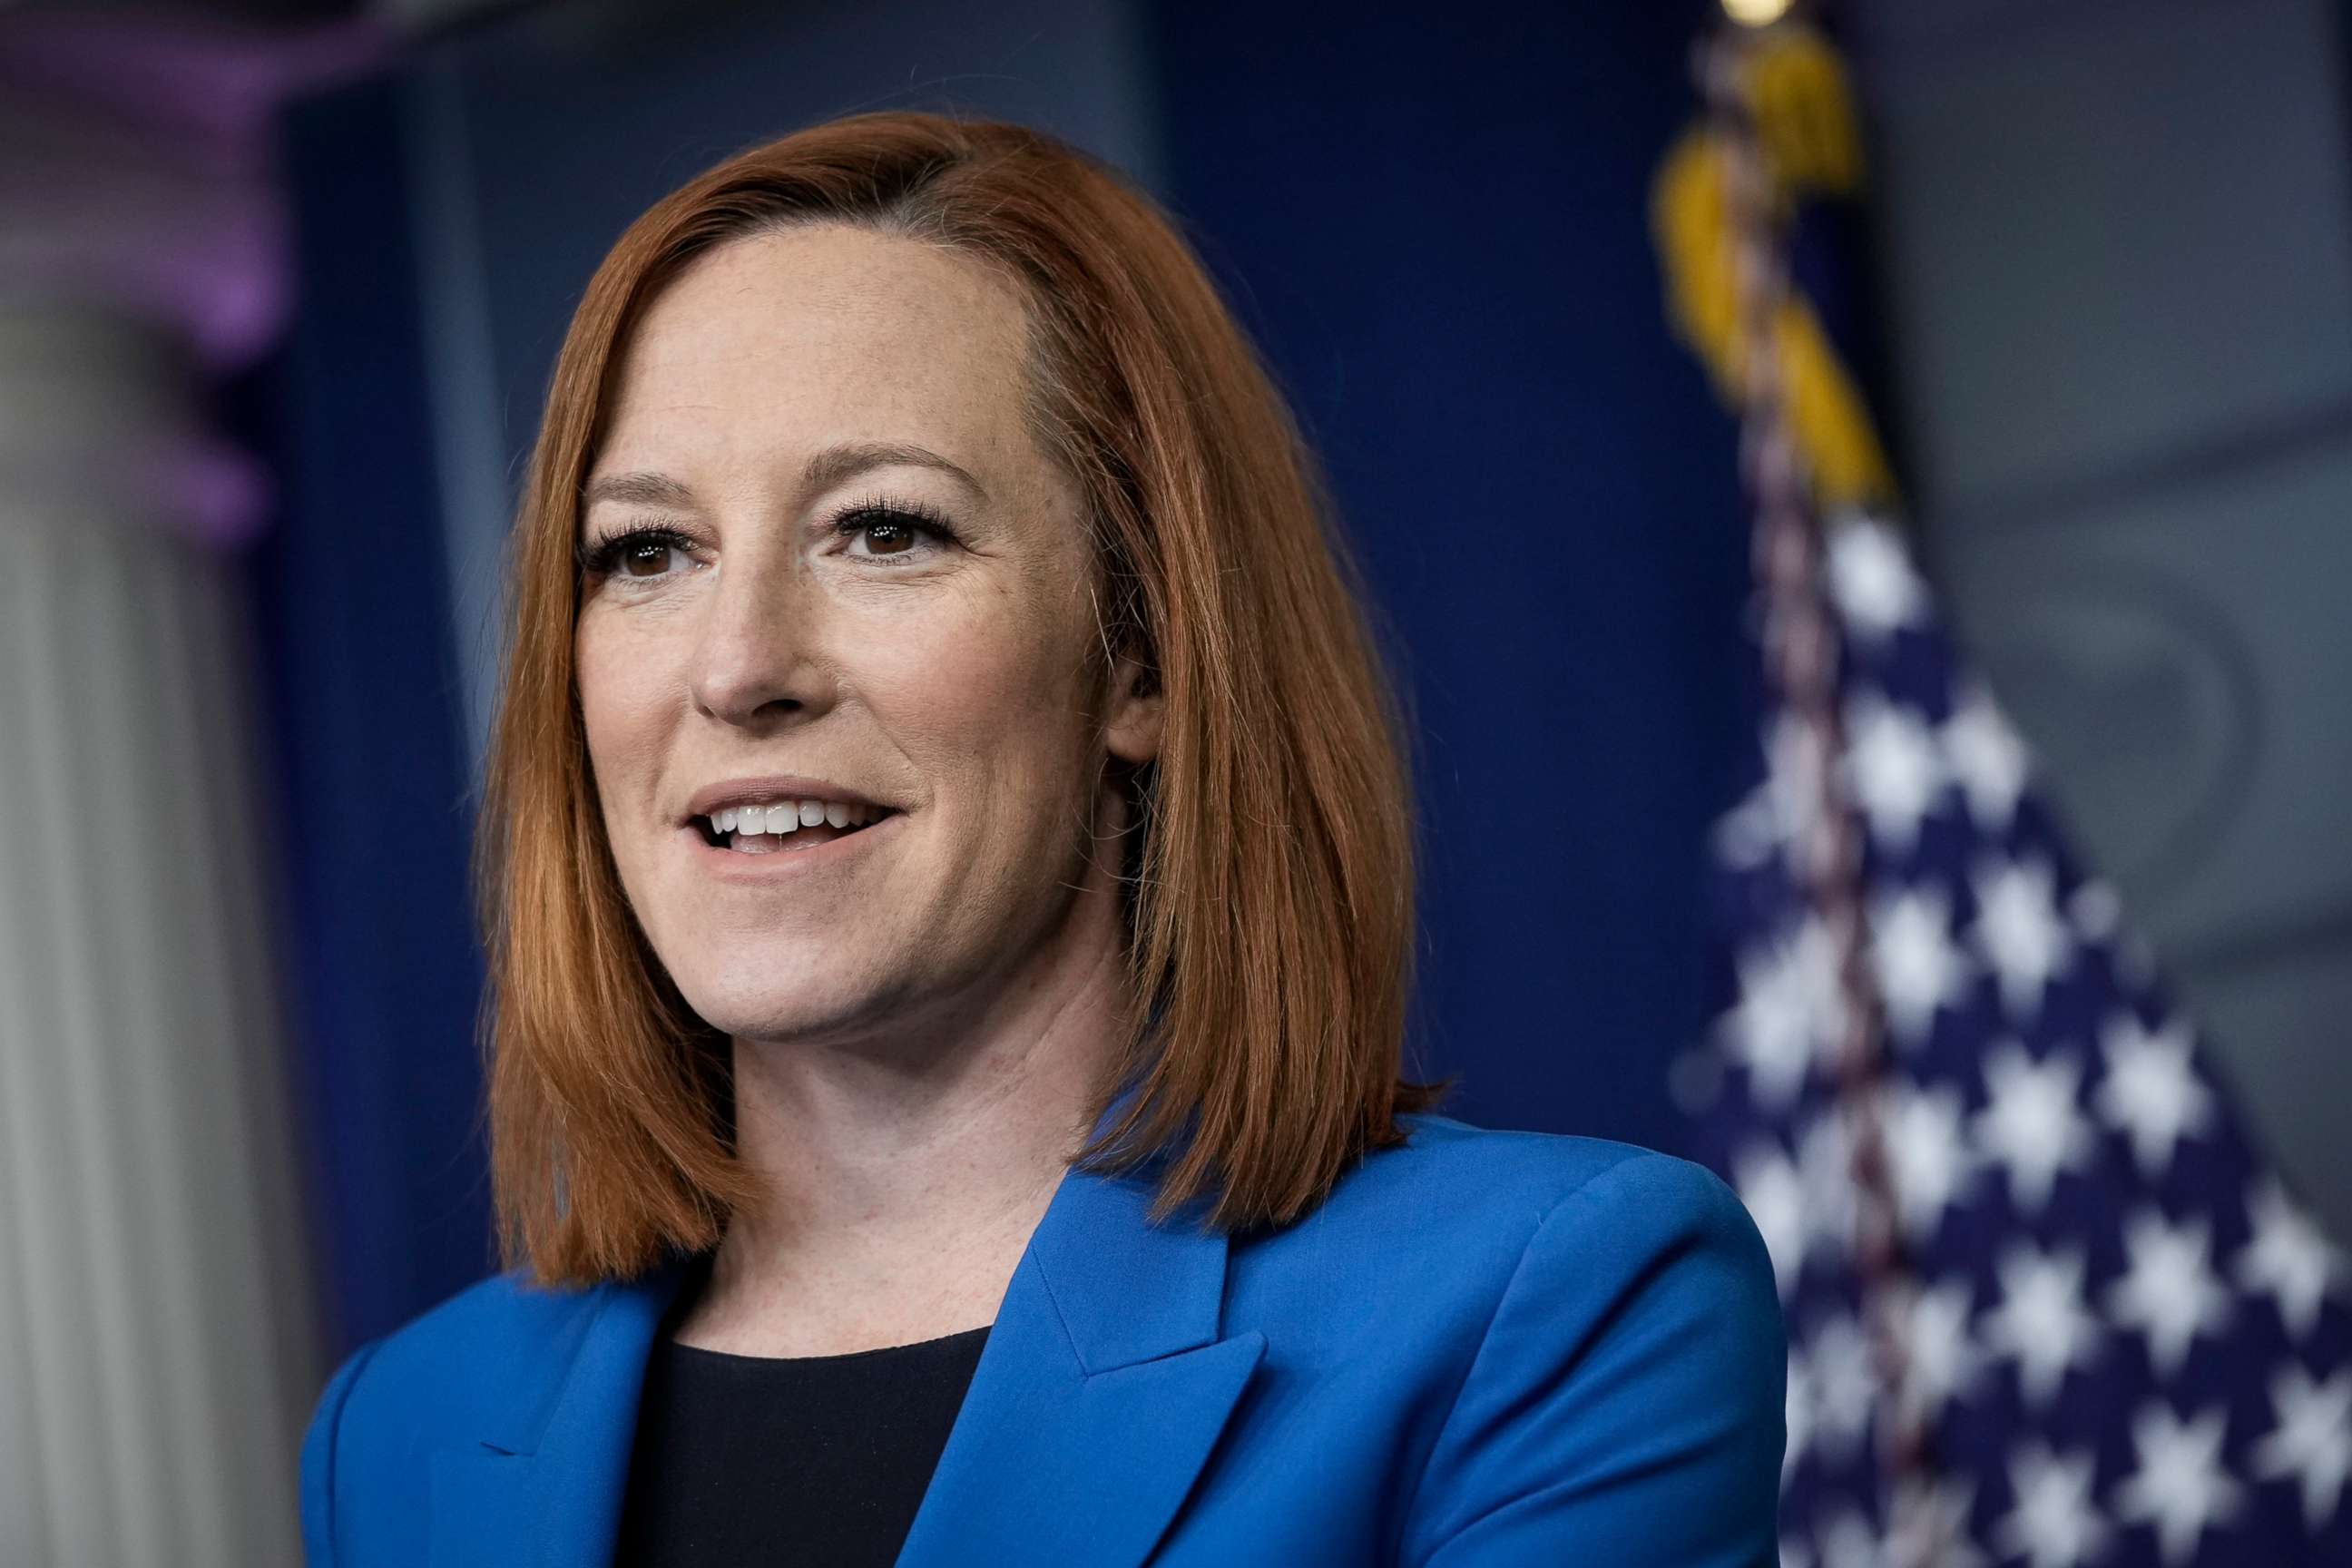 PHOTO: White House Press Secretary Jen Psaki speaks during the daily press briefing at the White House on April 26, 2021, in Washington, D.C.